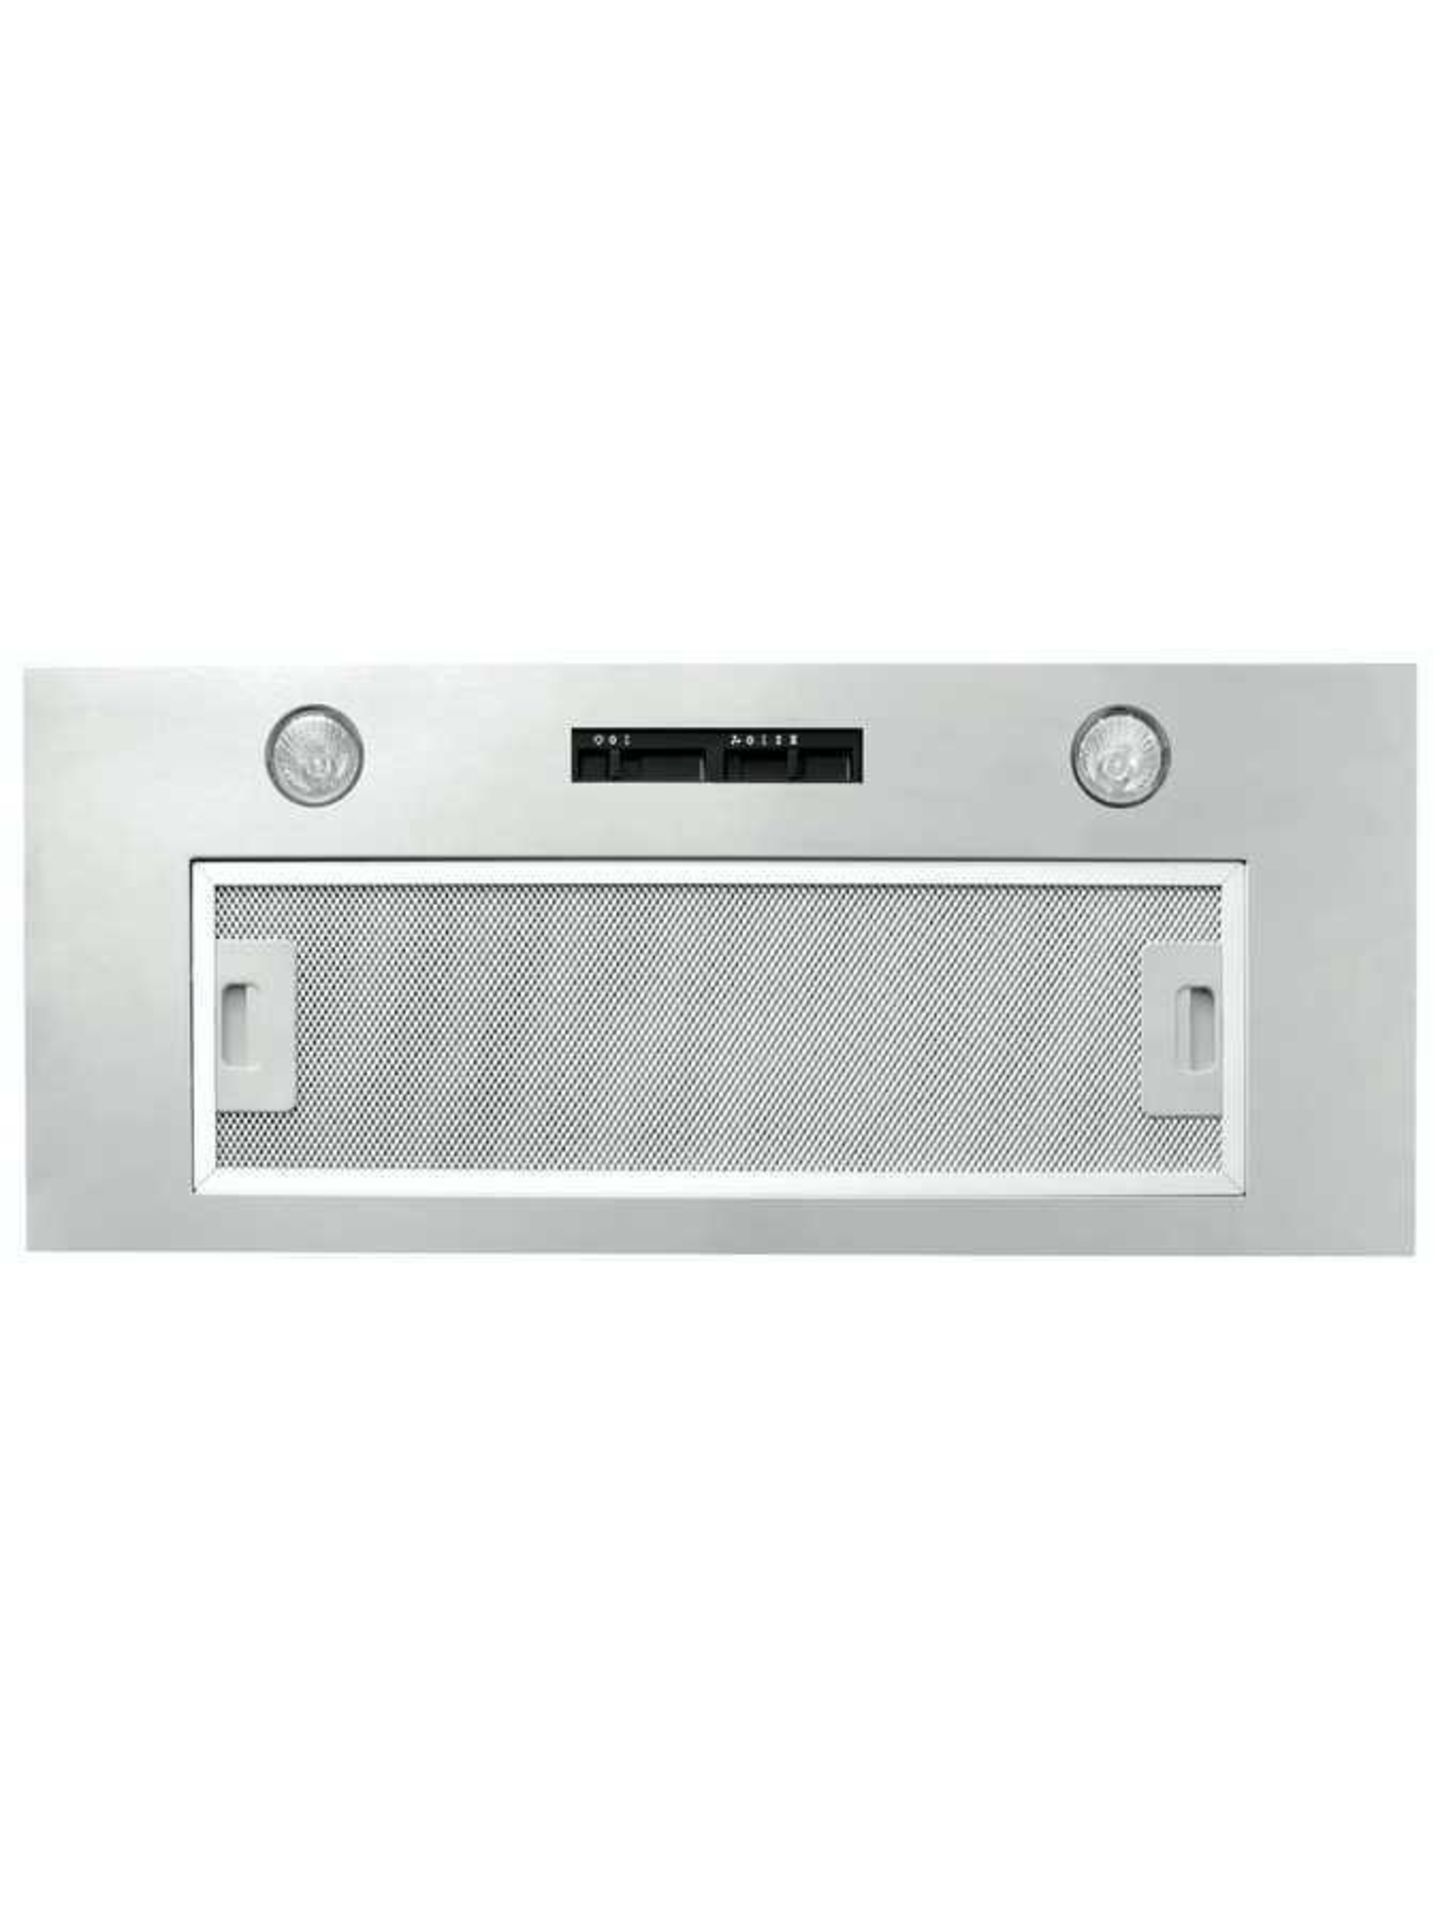 RRP £120 Boxed Art11324 70Cm Silver Insert Canopy Cooker Hood